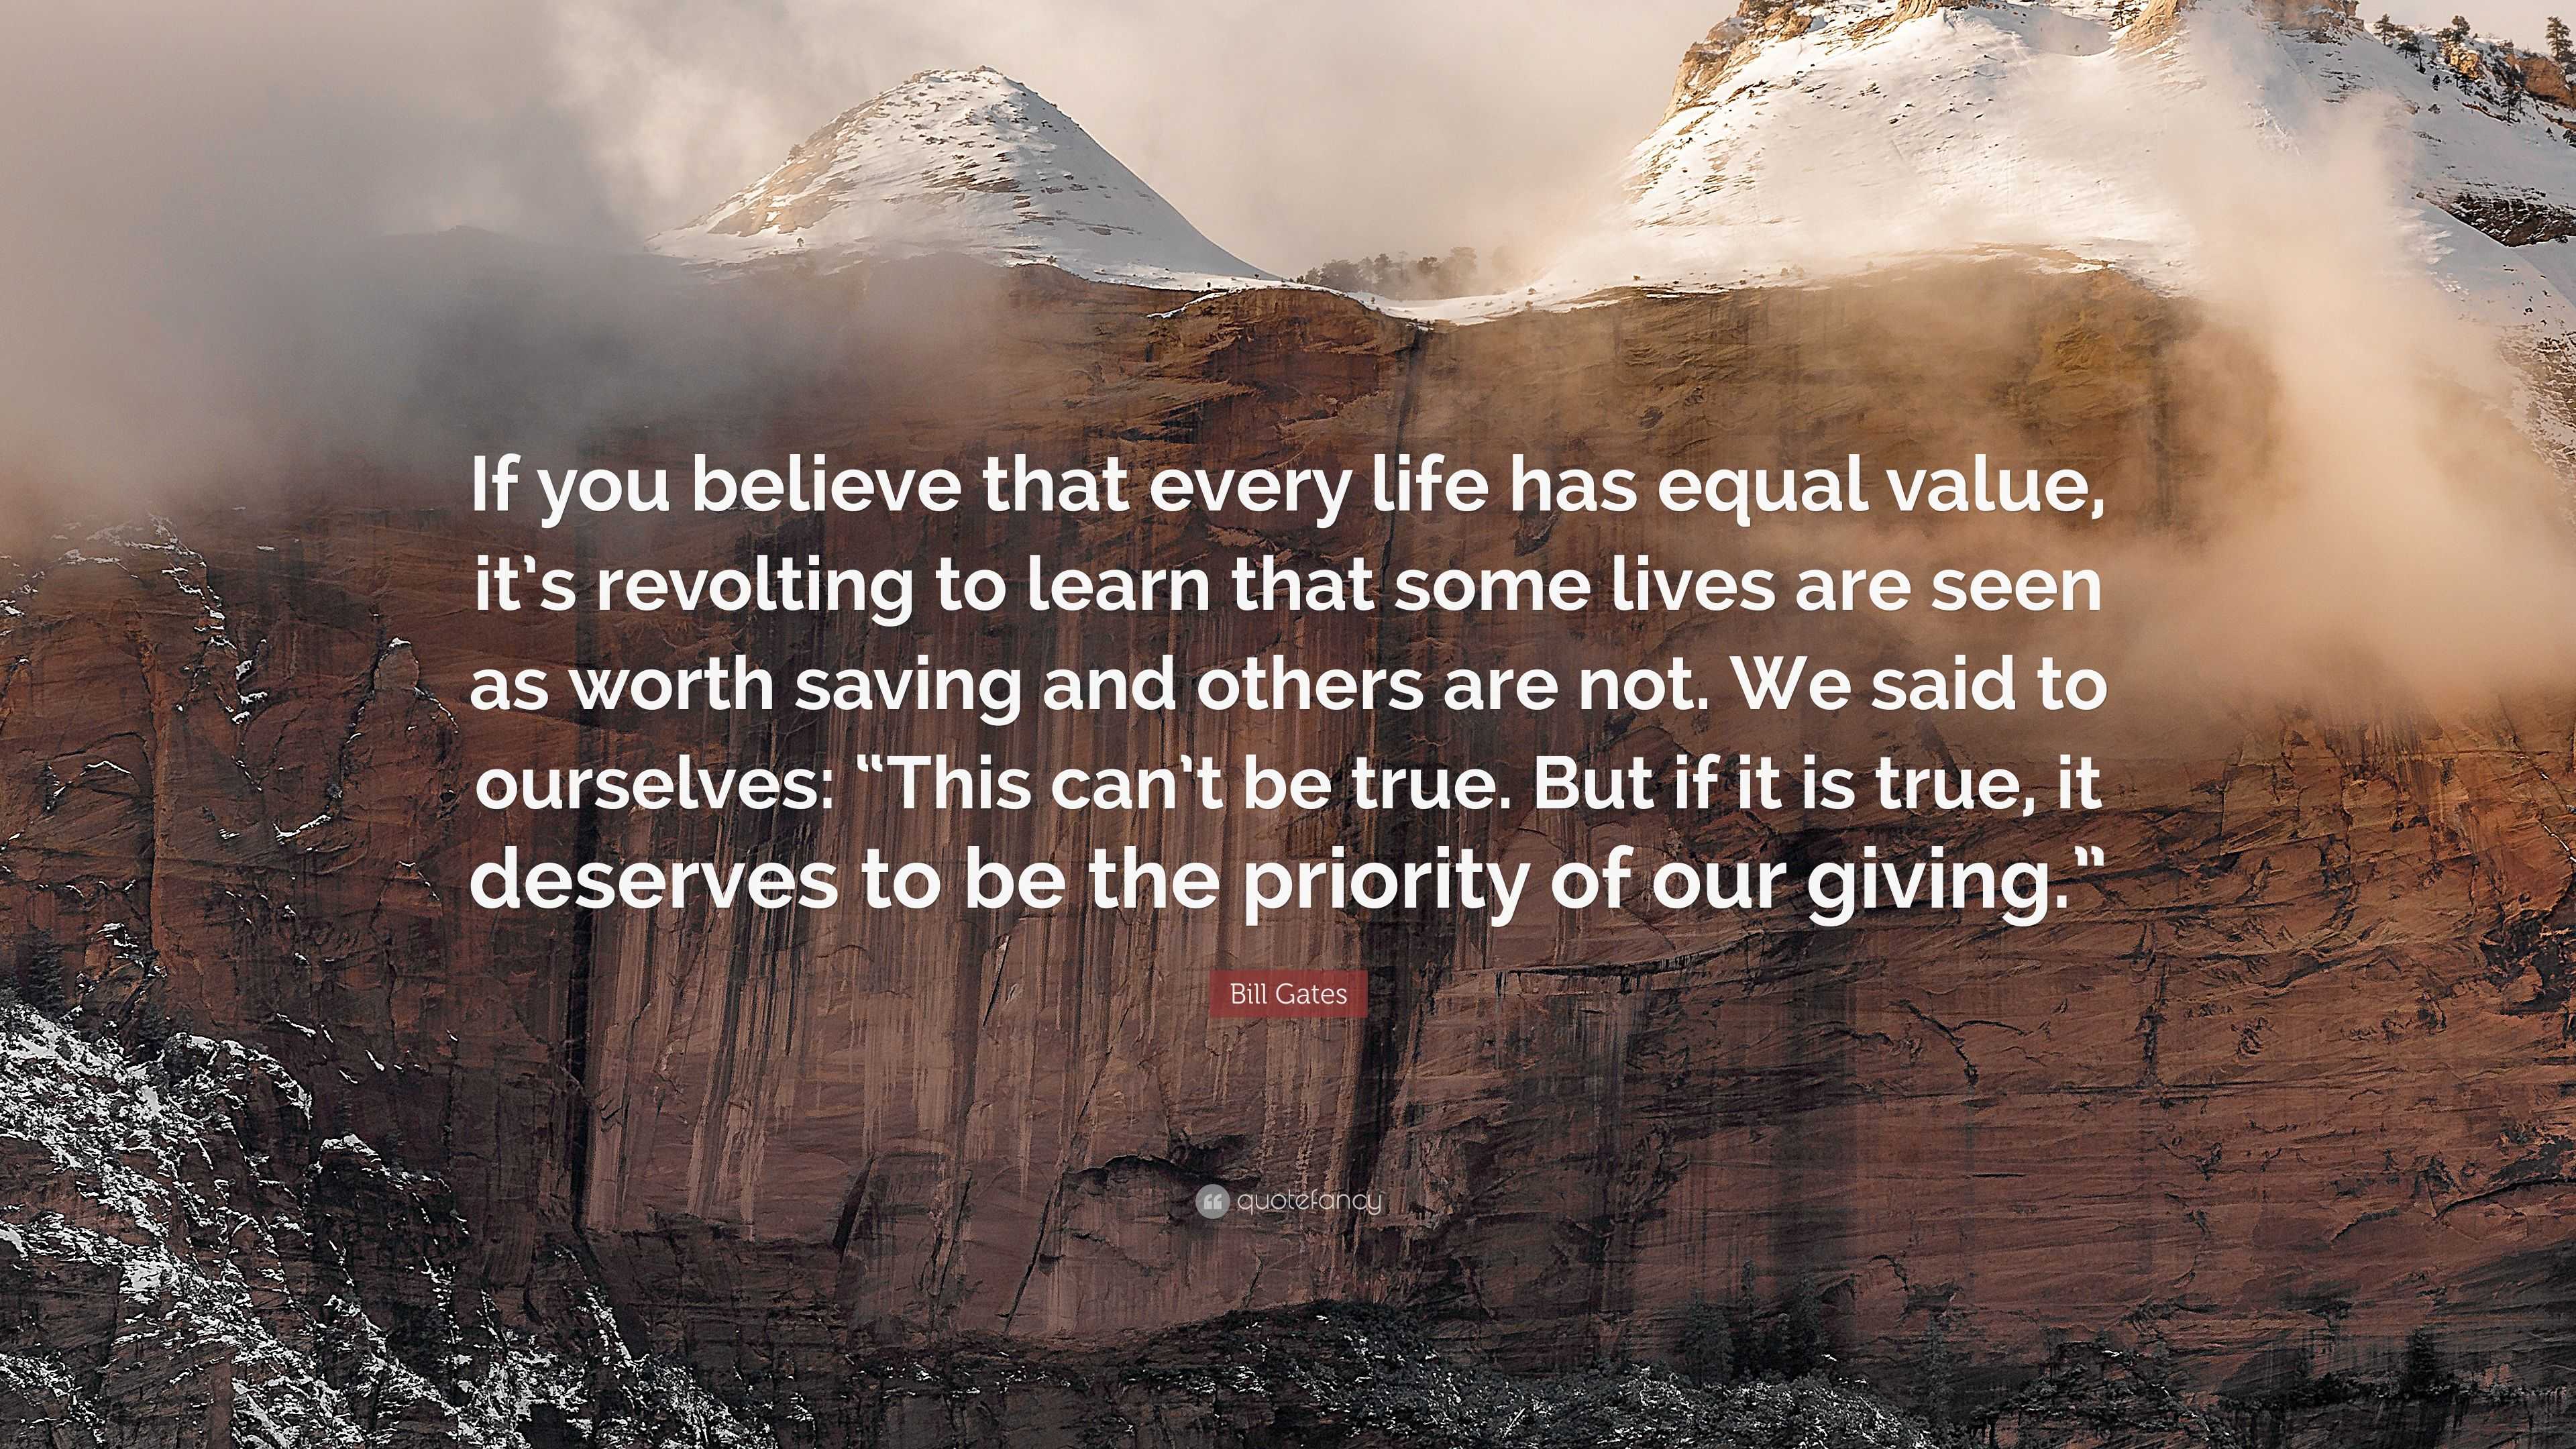 Bill Gates Quote “If you believe that every life has equal value it s